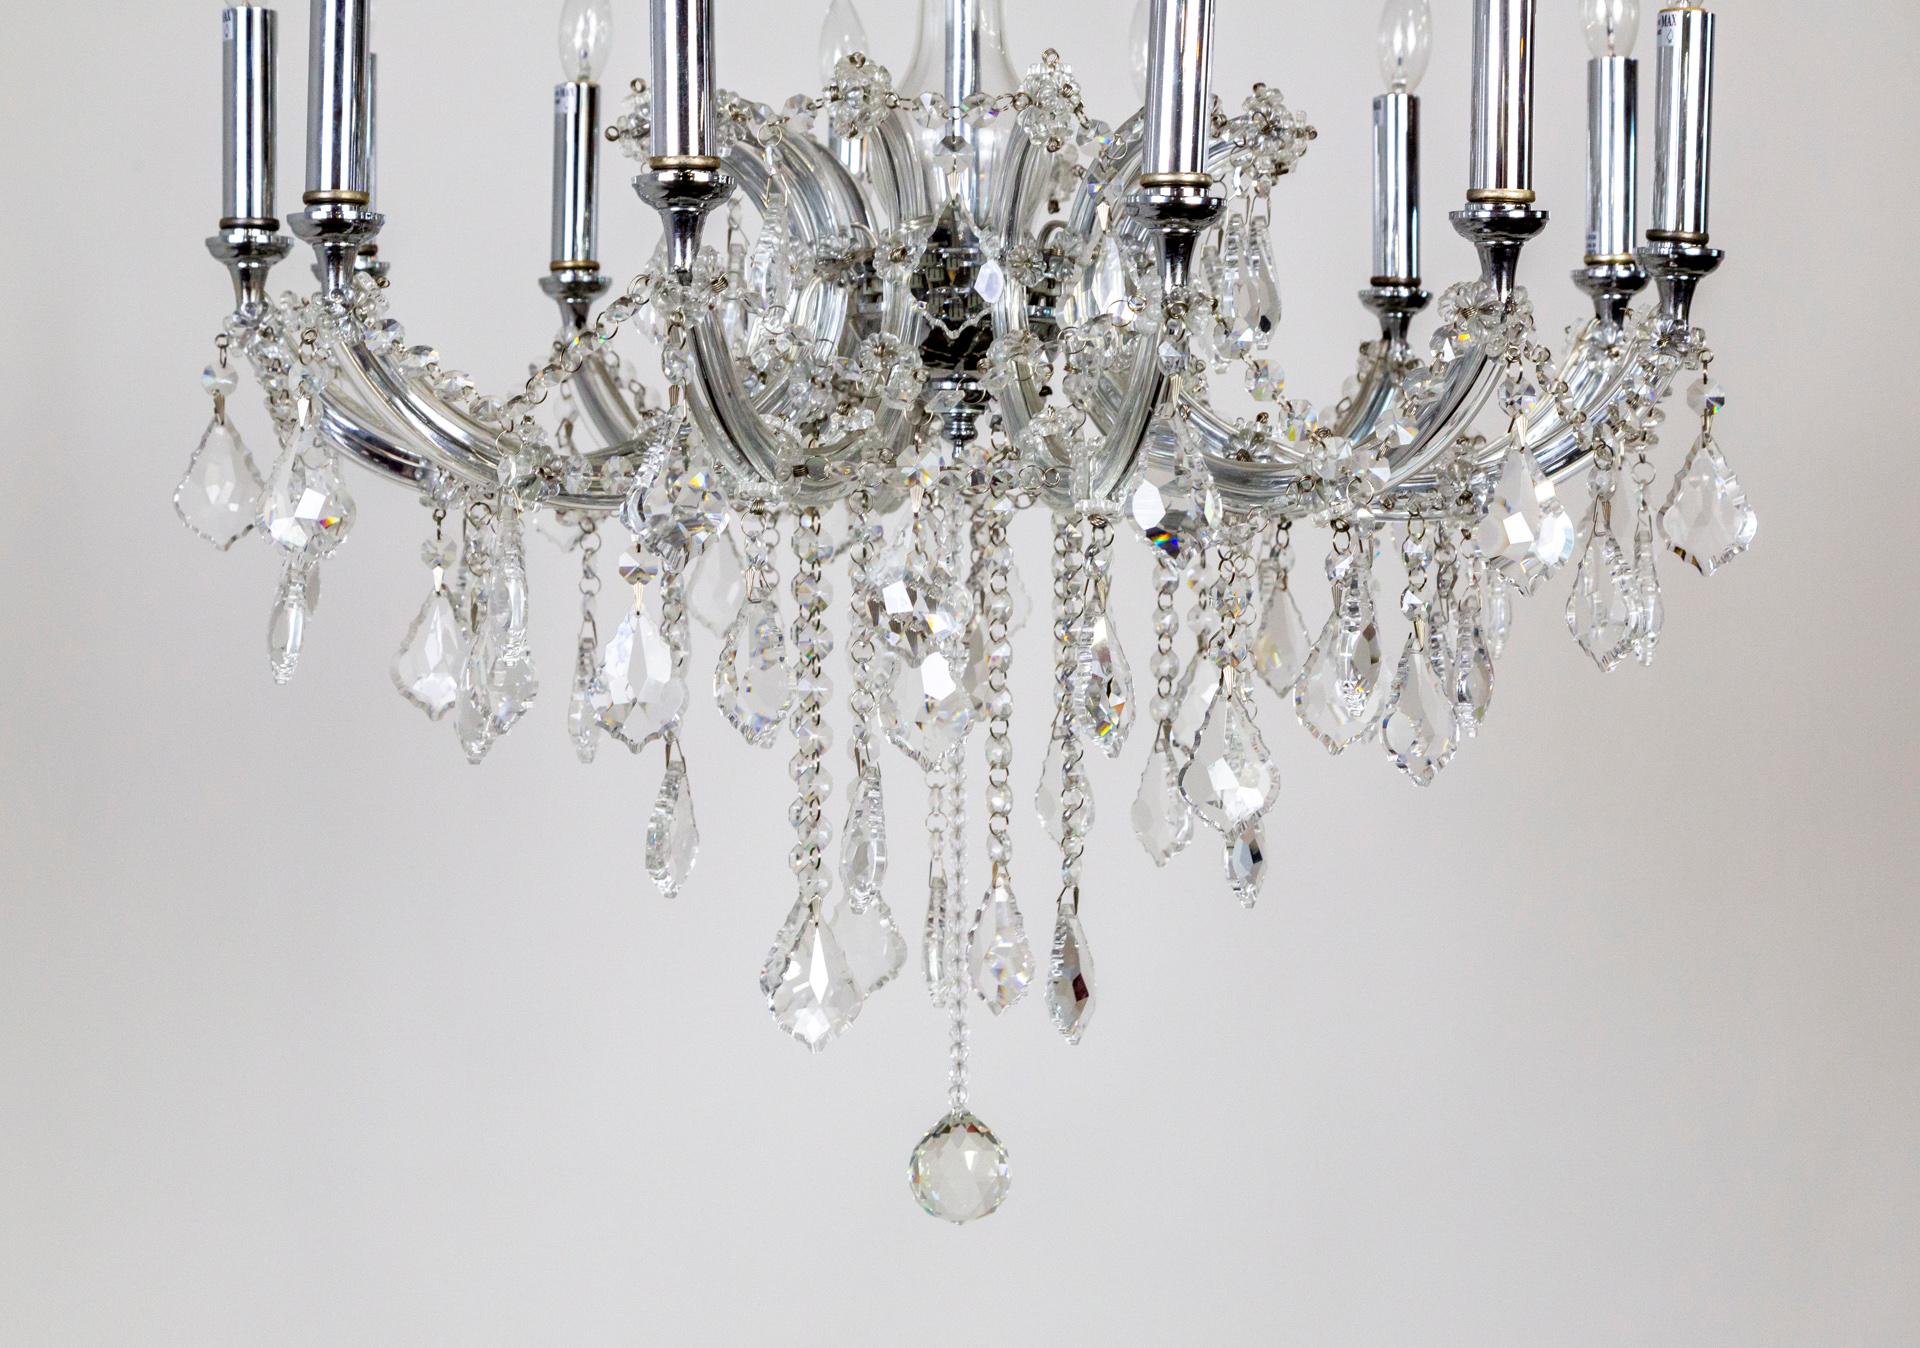 A Bohemian glass chandelier with 12 arms with garlands of finely cut crystals and lengthy, dangling, beaded strands finished with large pendeloque crystals and a faceted ball; chrome colored candle covers and hardware, with gold floral painted